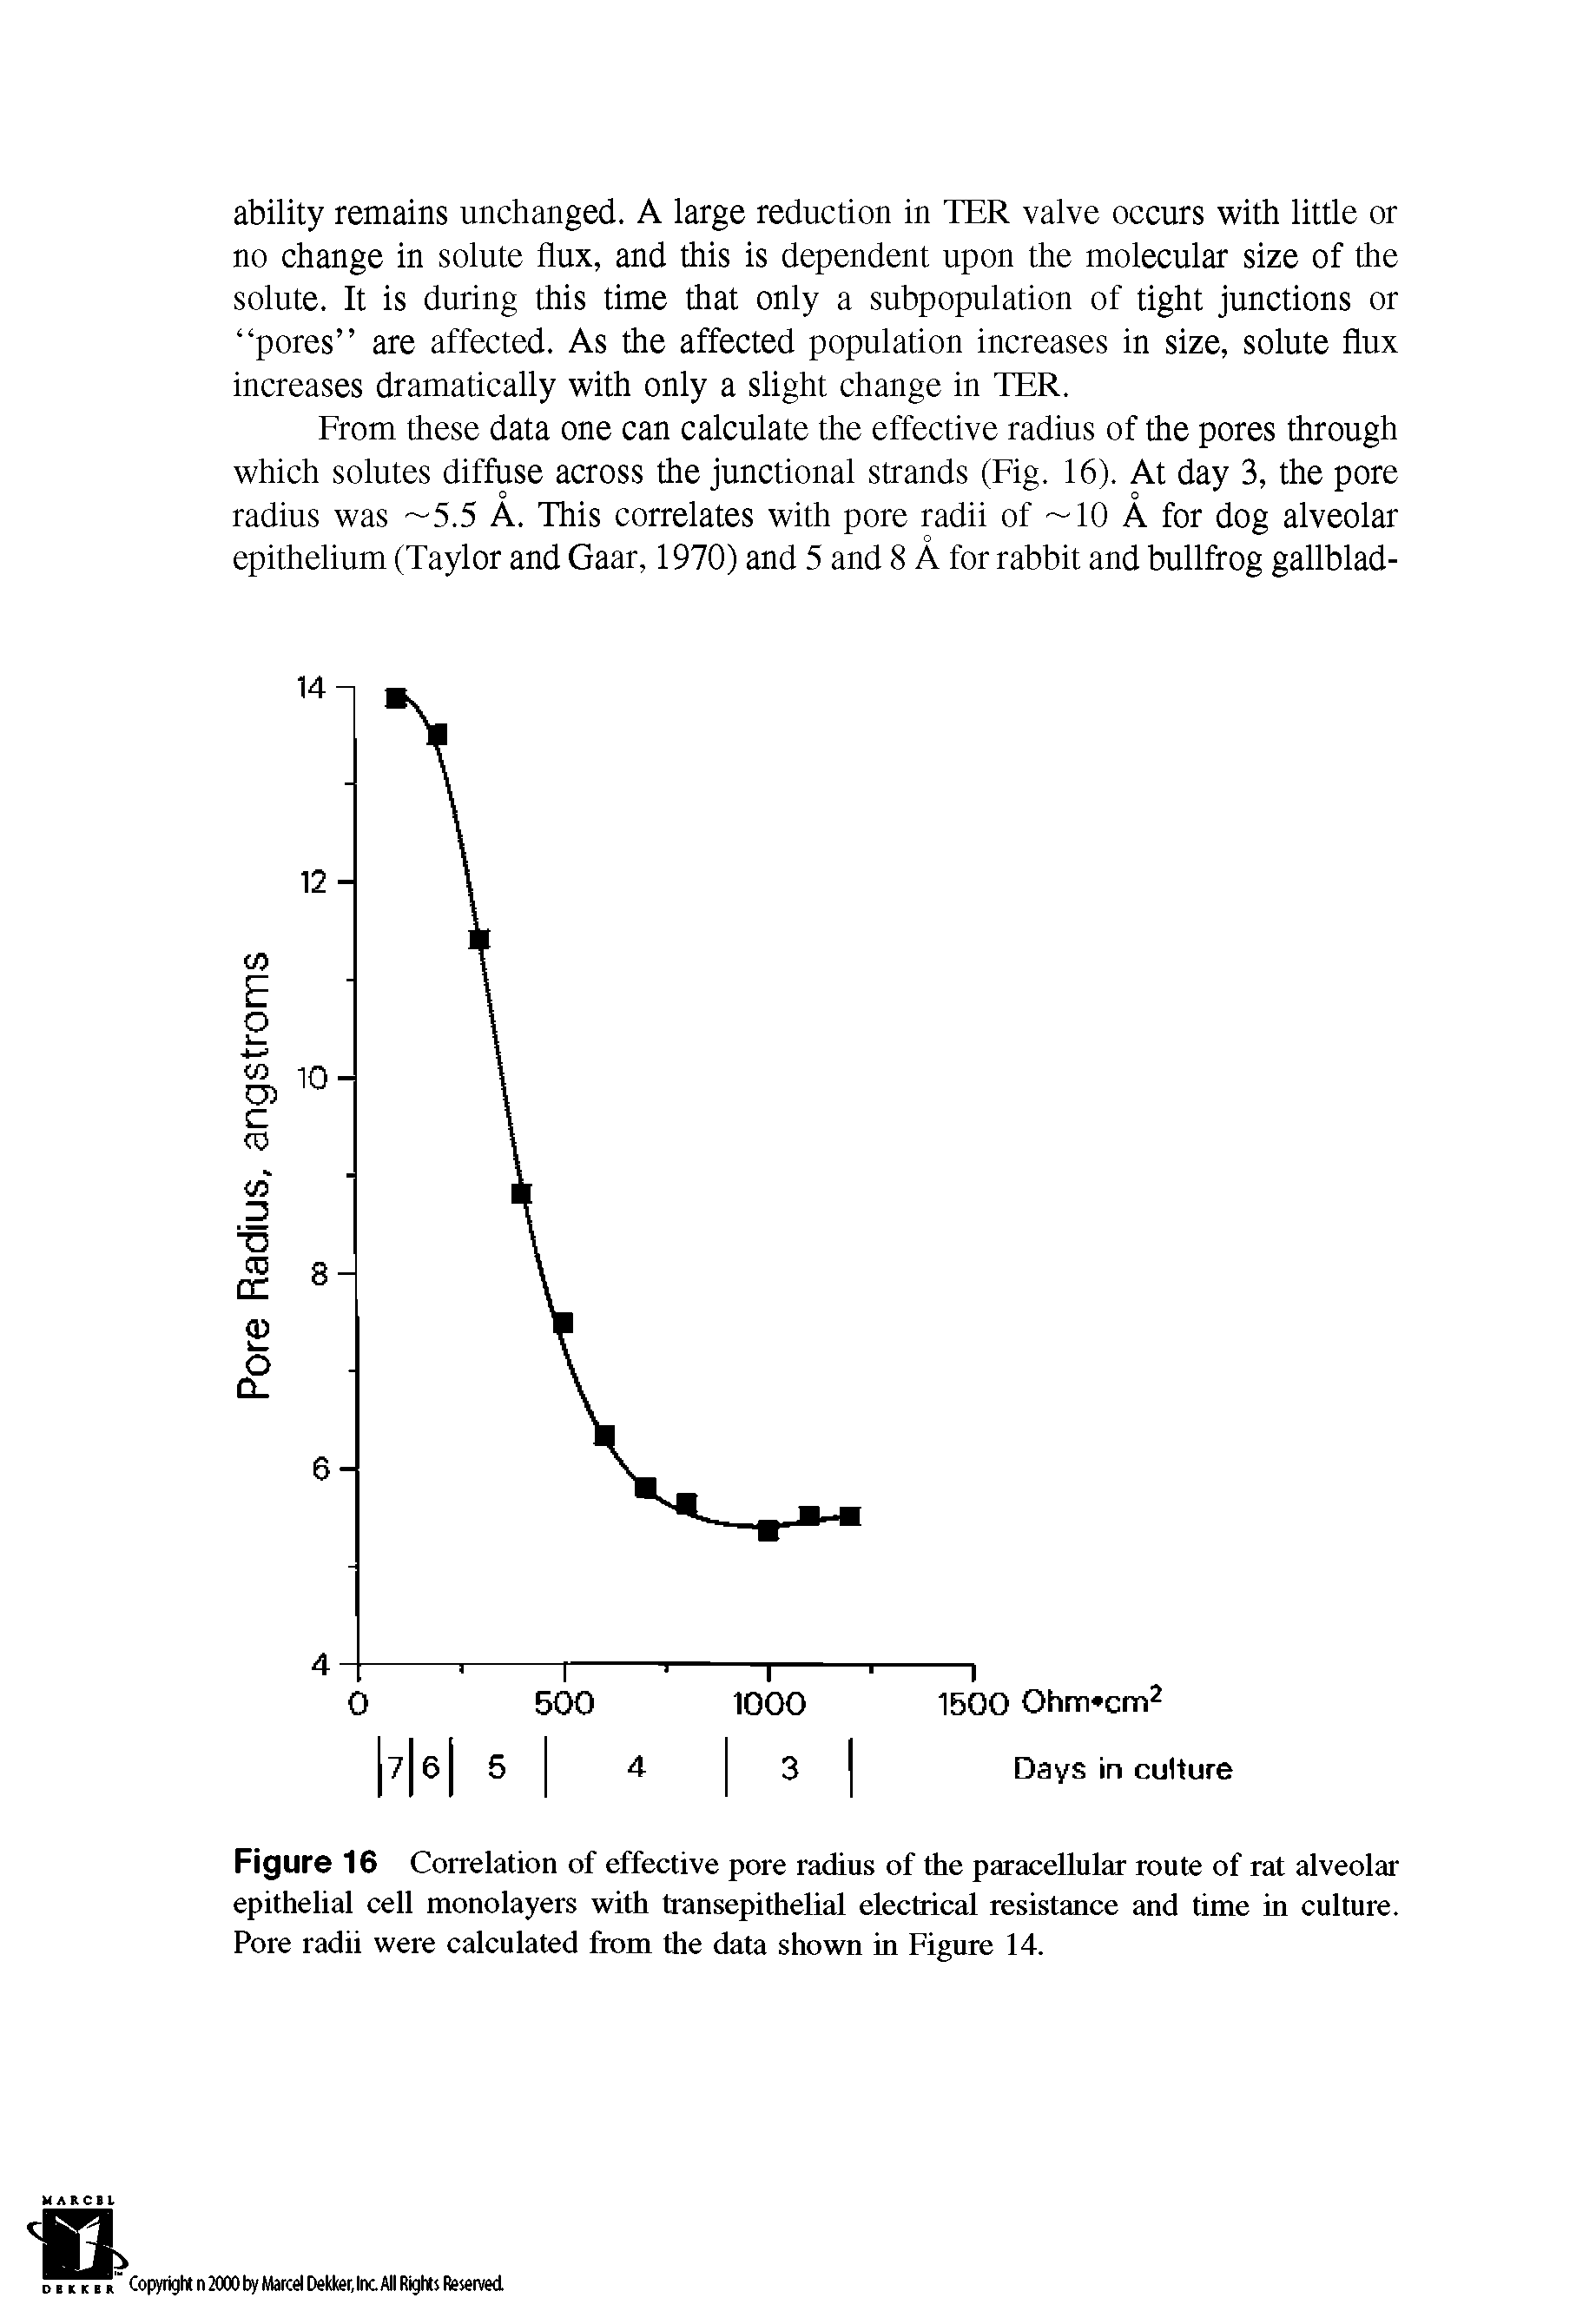 Figure 16 Correlation of effective pore radius of the paracellular route of rat alveolar epithelial cell monolayers with transepithelial electrical resistance and time in culture. Pore radii were calculated from the data shown in Figure 14.